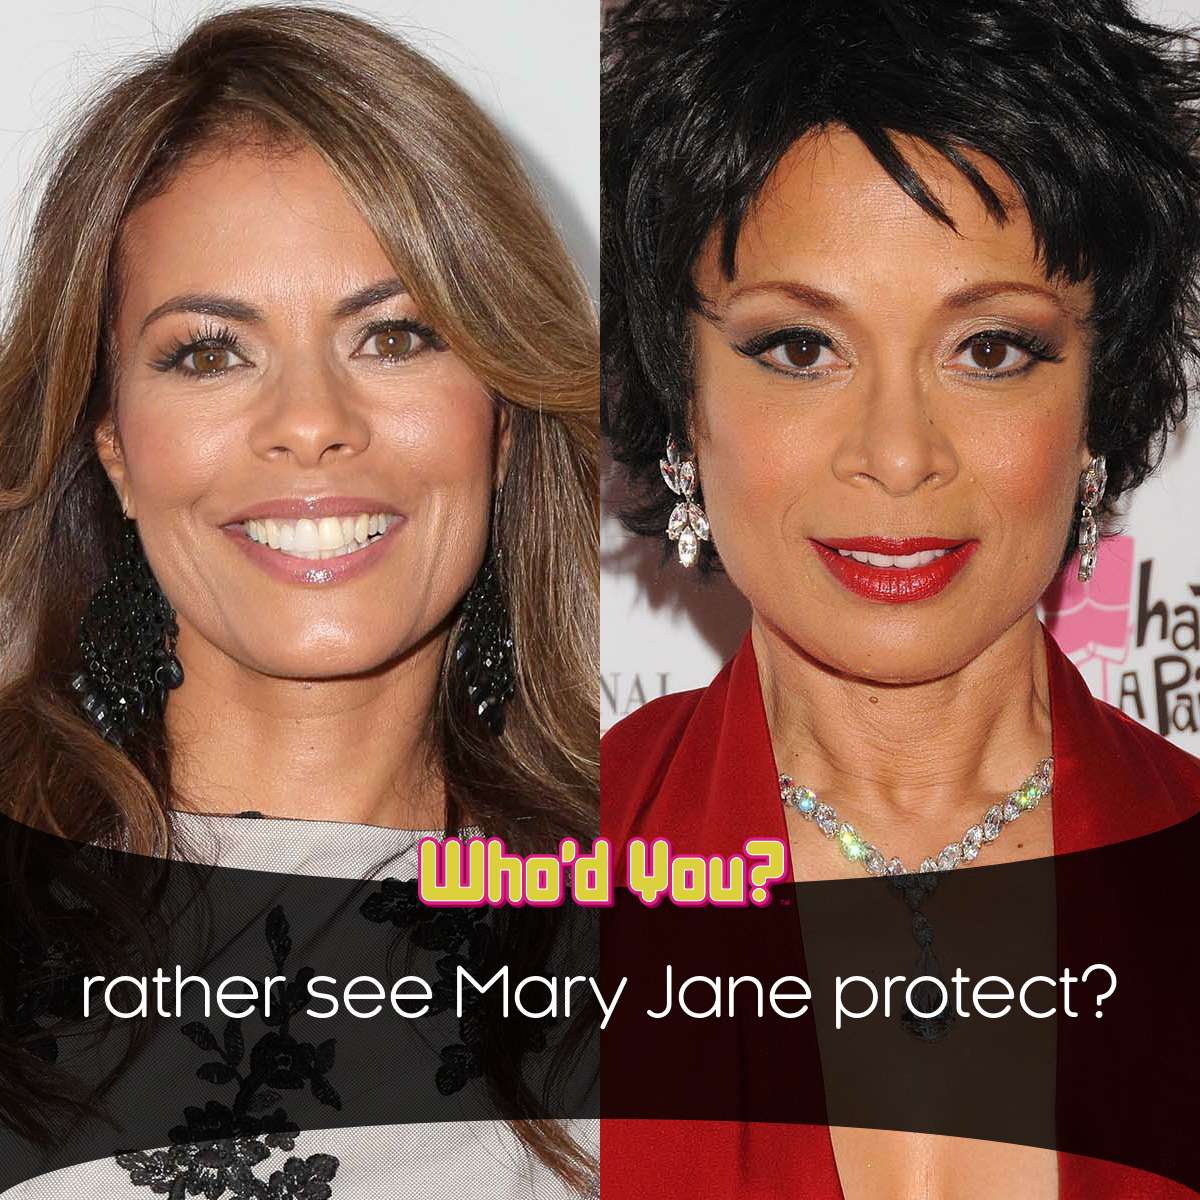 Who’d you rather see Mary Jane protect as she makes her way in NYC? Ronda or Kara? #BET #BeingMaryJane #ValariePettiford @thelisavidal 10PM